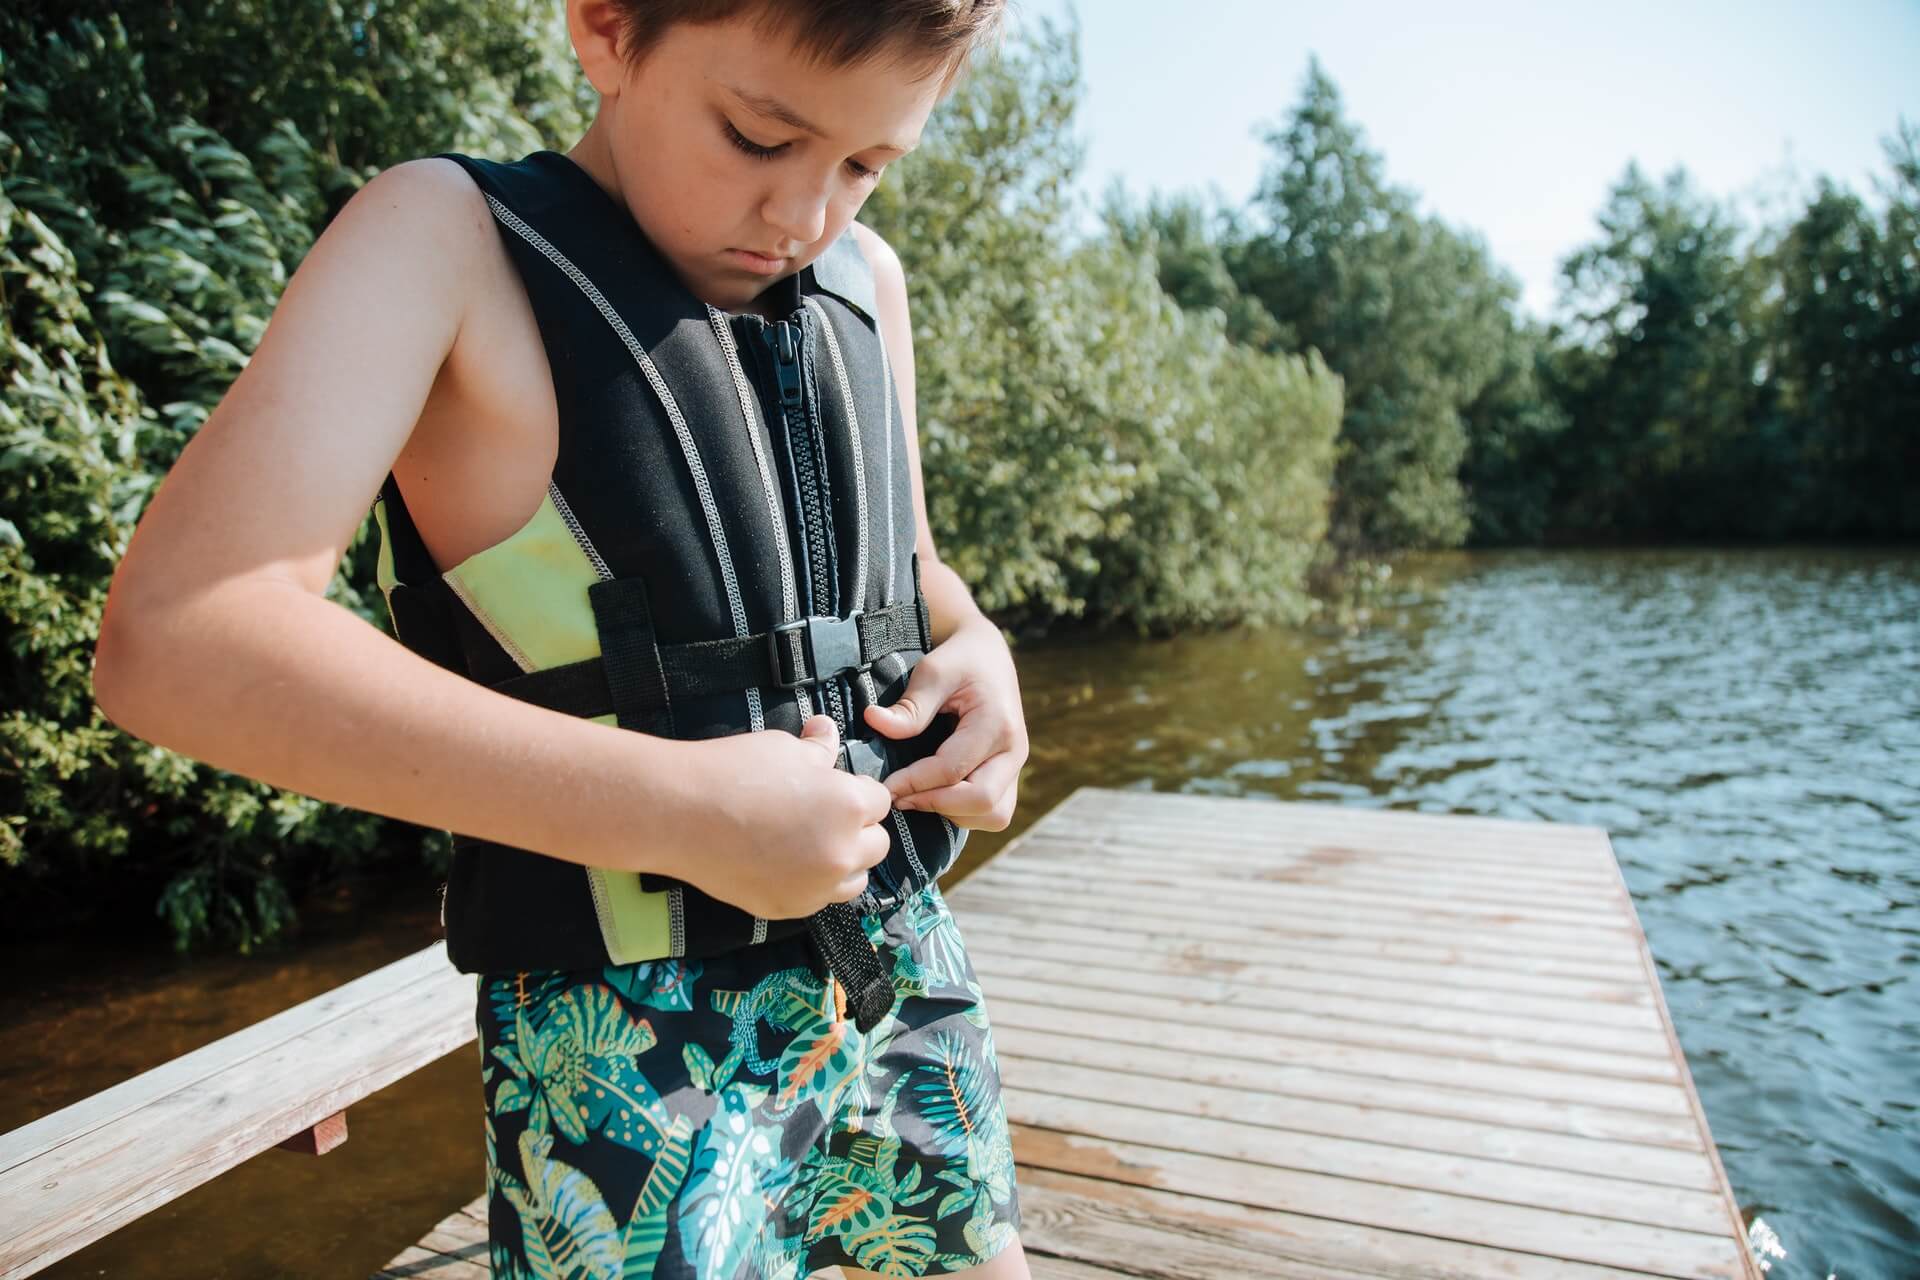 Young boy fastening a life jacket